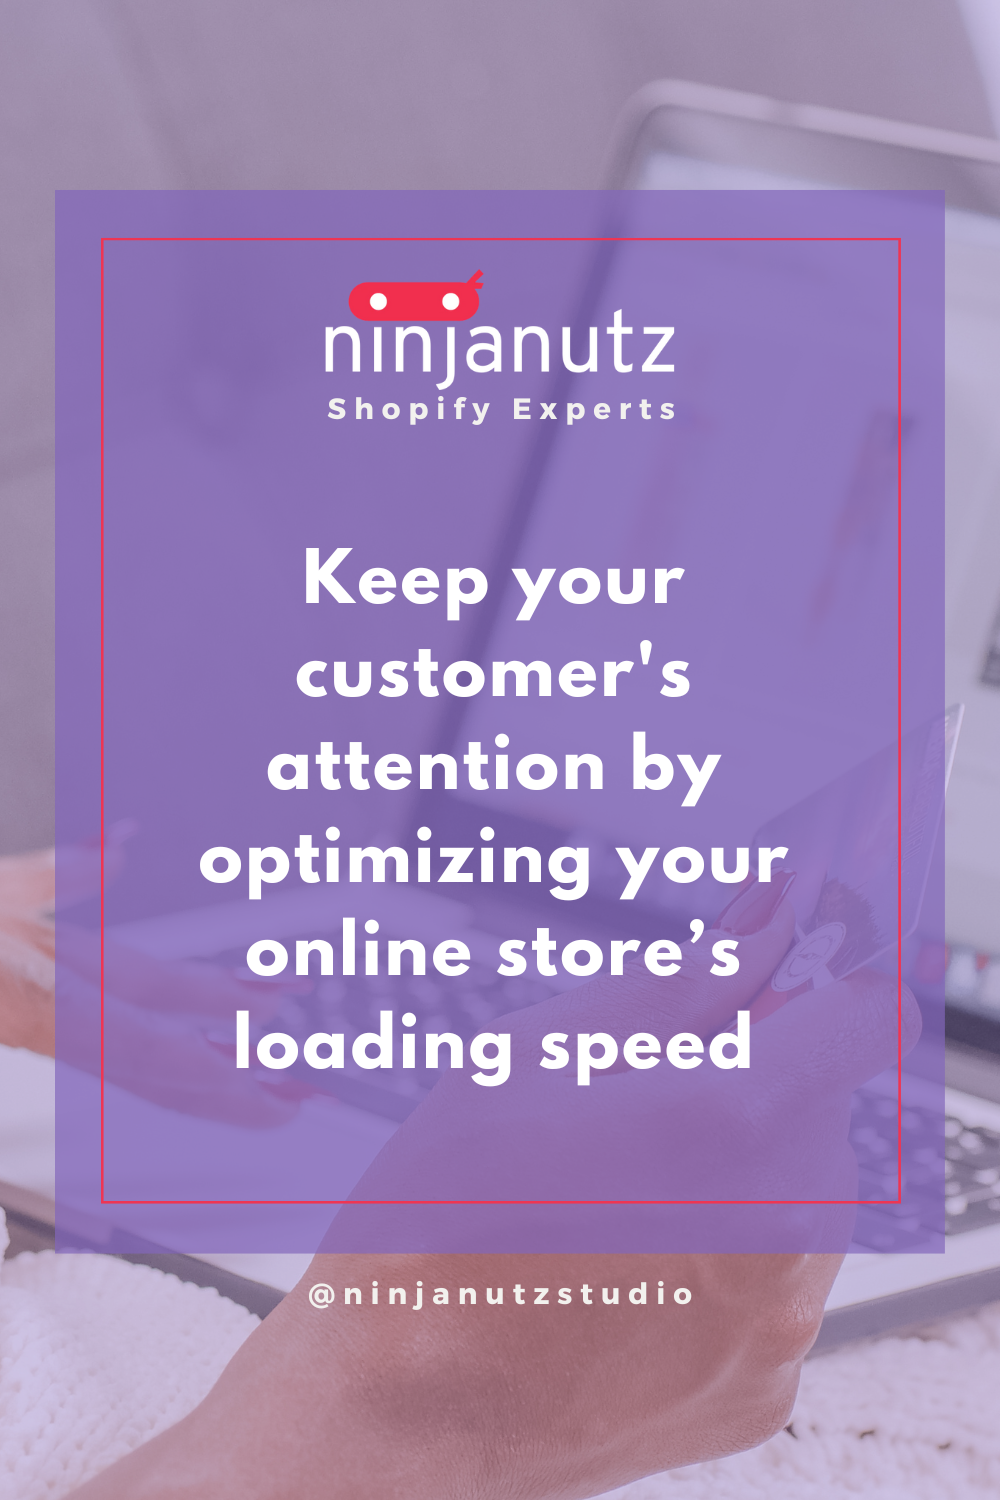 Keep your customer's attention by optimizing your online store’s loading speed NinjaNutz®